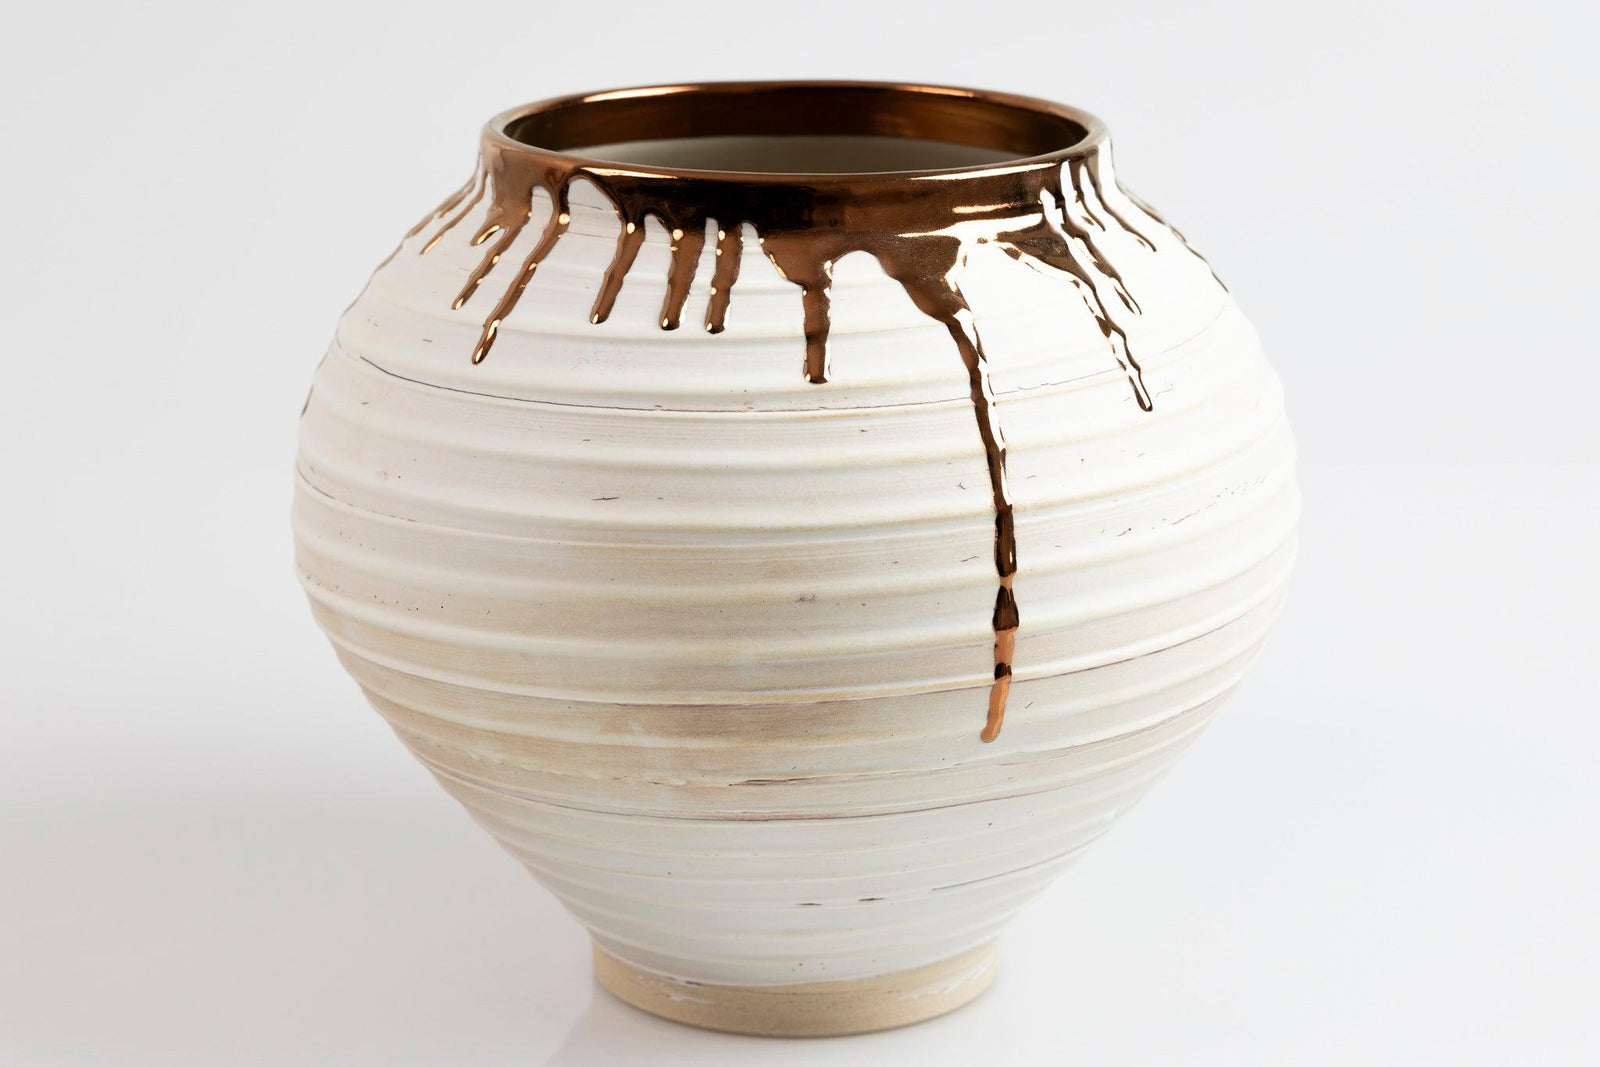 Crackle textured Moon Jar with copper lustre rim, by Alex McCarthy, available at Padstow Gallery, Cornwall